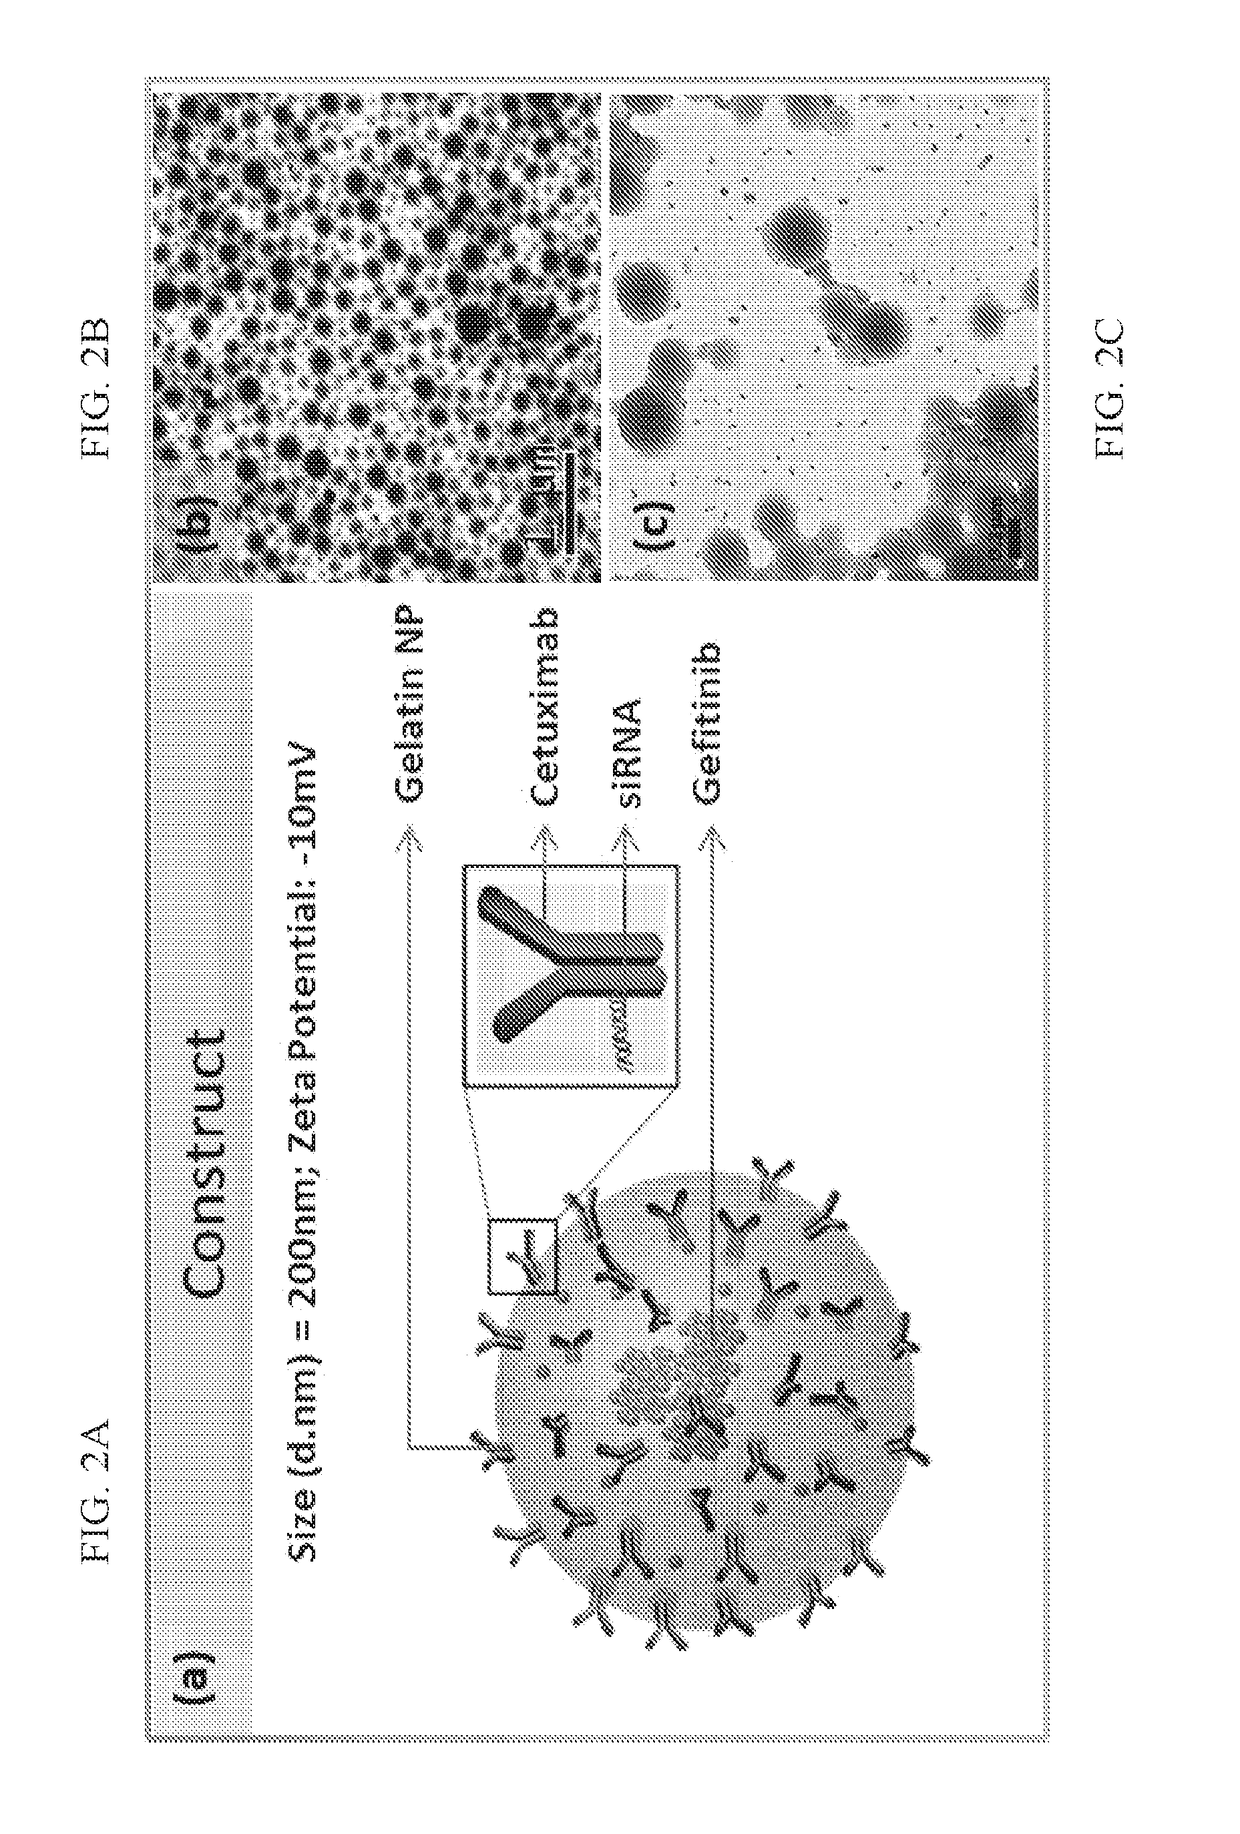 Targeted nanoparticle conjugate and method for co-delivery of sirna and drug